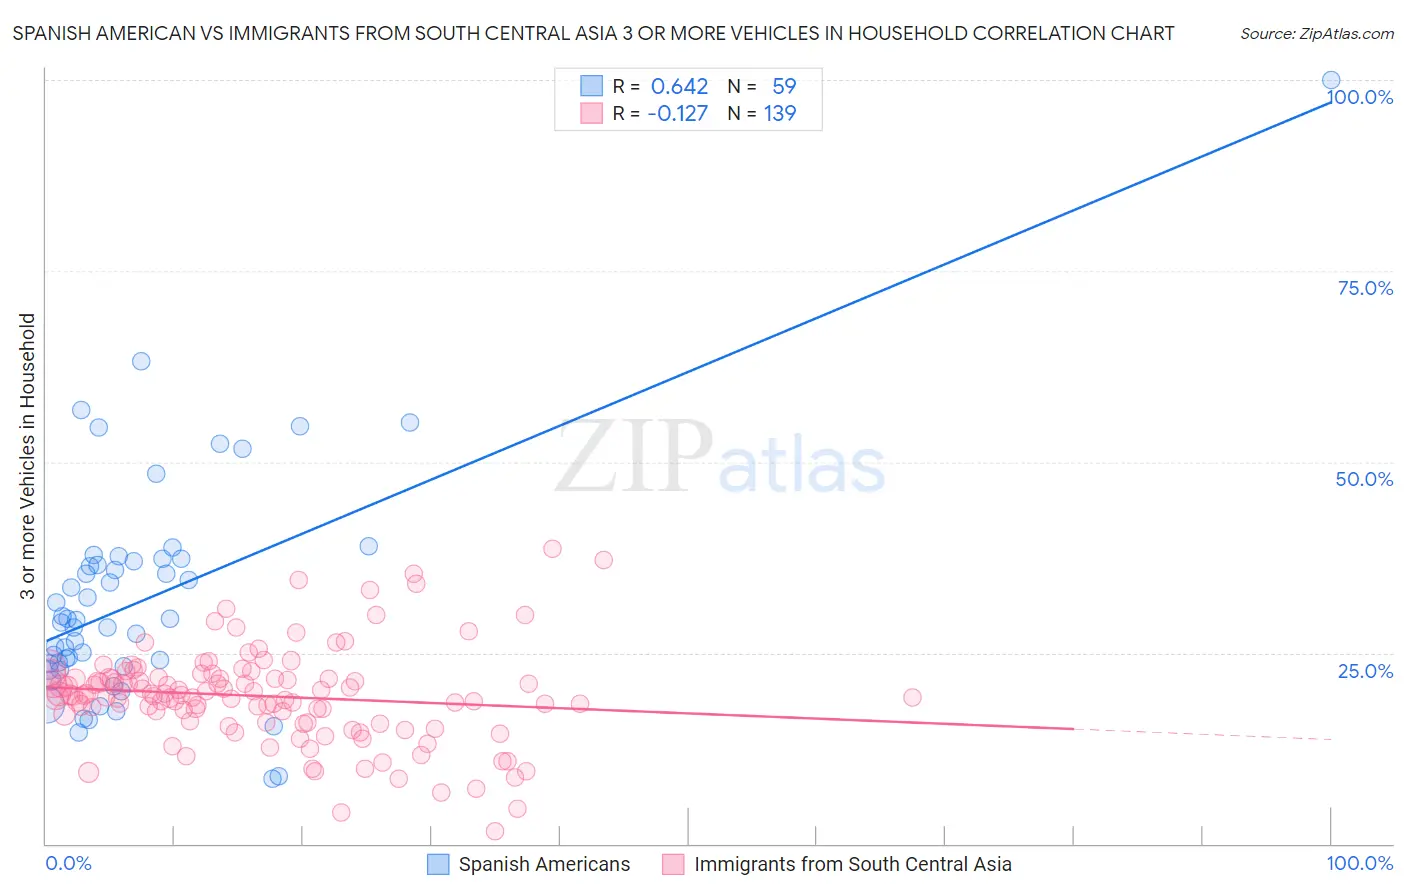 Spanish American vs Immigrants from South Central Asia 3 or more Vehicles in Household